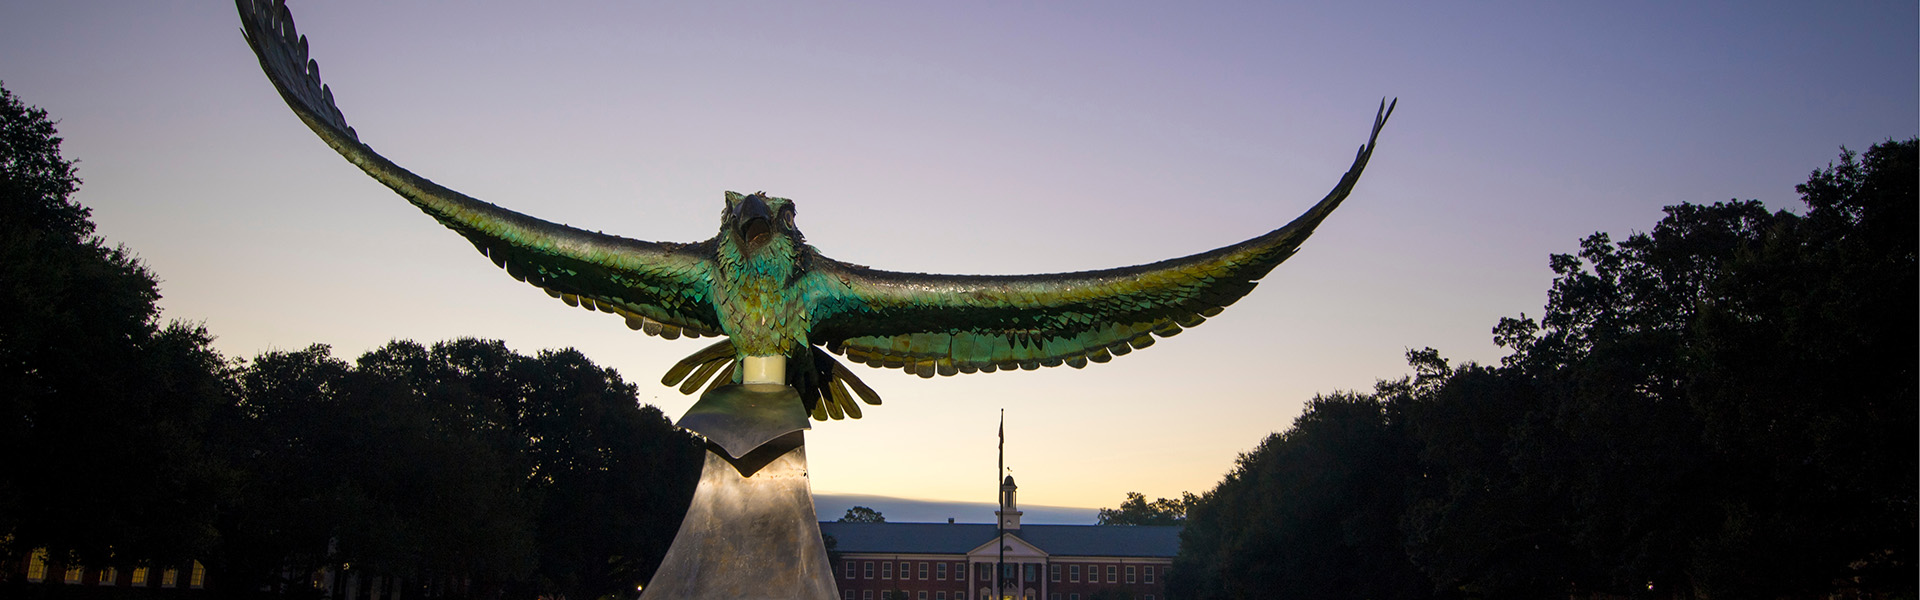 seahawk statue in front of campus at dusk